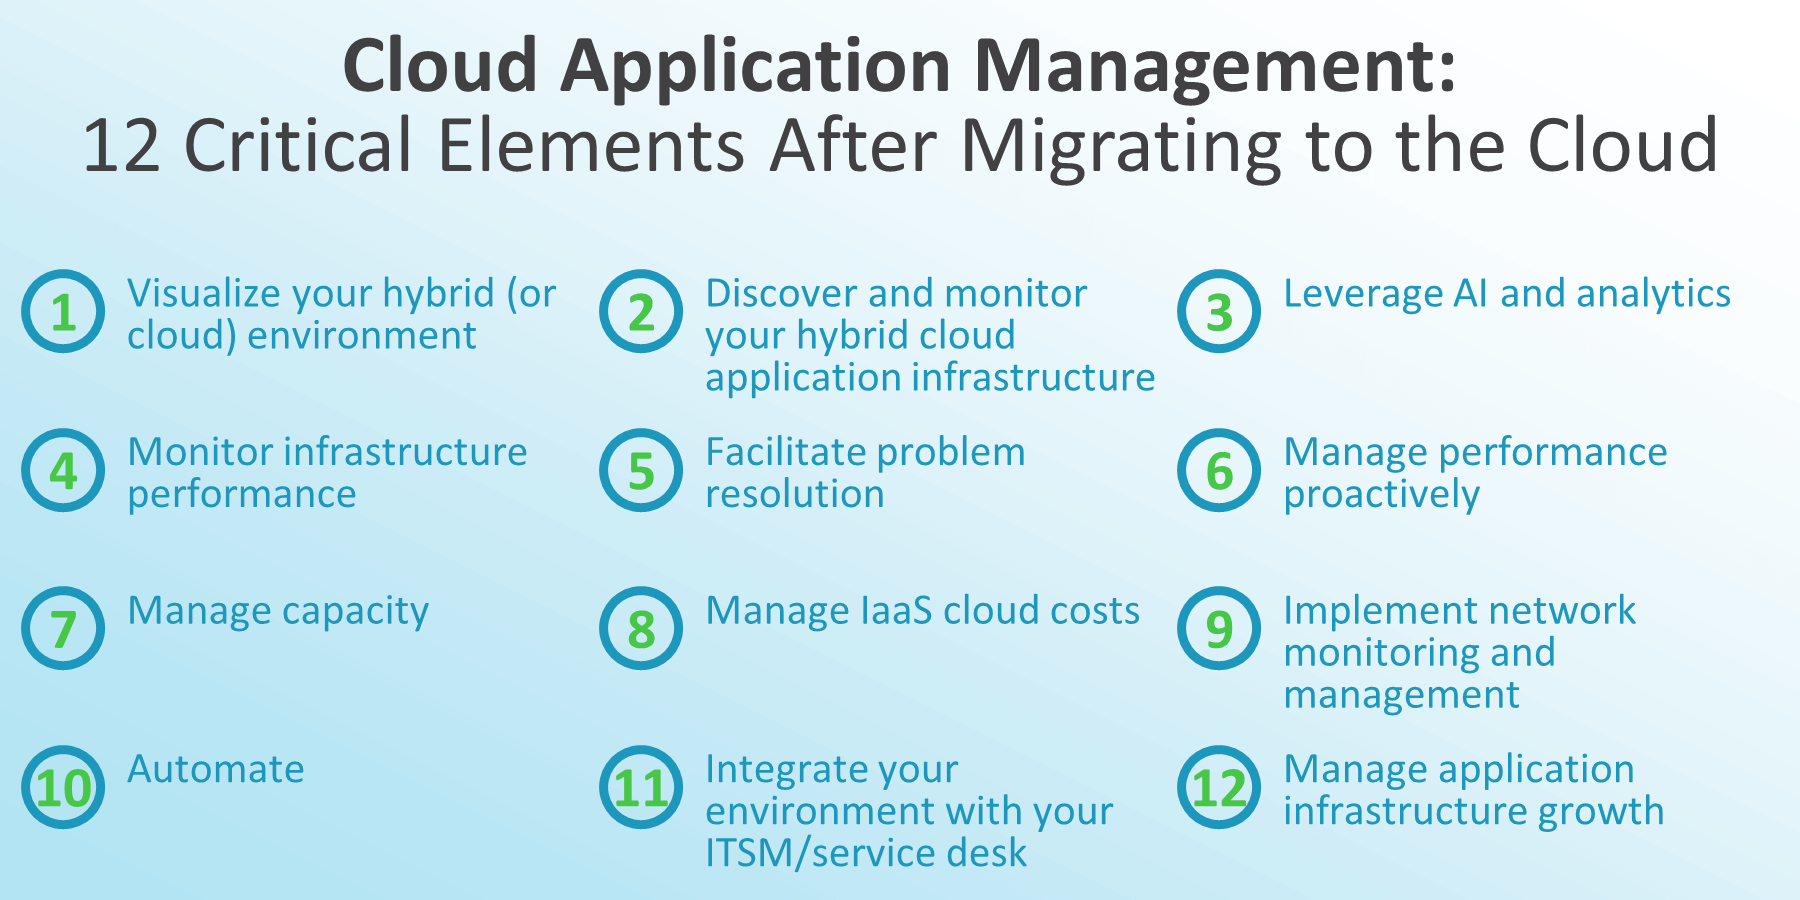 Cloud application management: 12 critical elements after migrating to the cloud